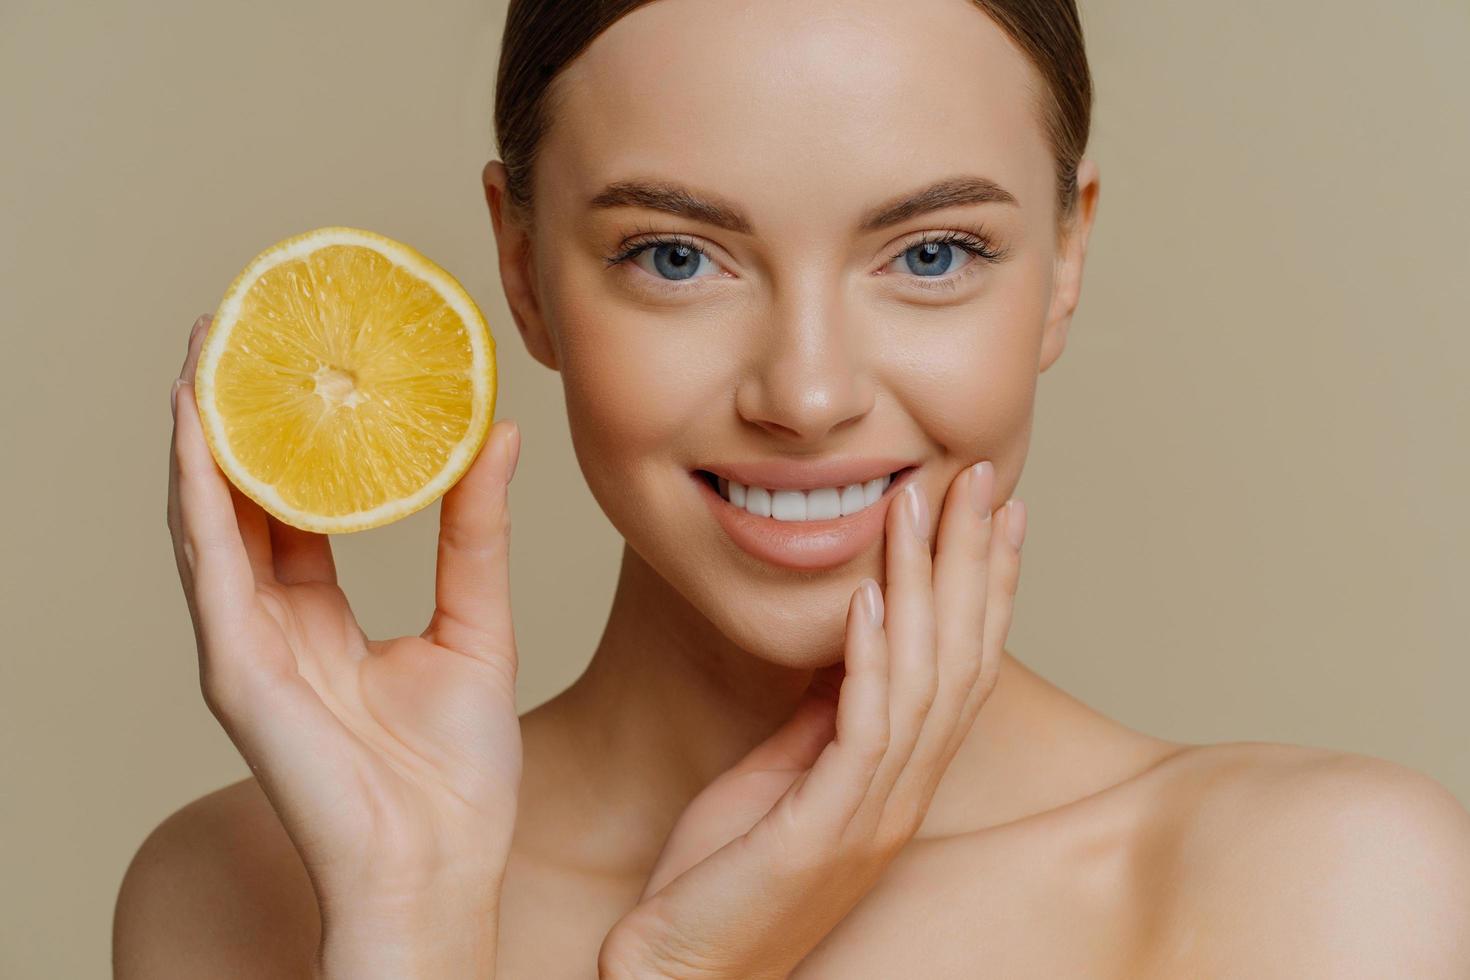 Close up shot of beautiful tender woman smiles gently has healthy well groomed skin holds slice of lemon uses citrus fruit for beauty and health stands shirtless isolated over brown background photo